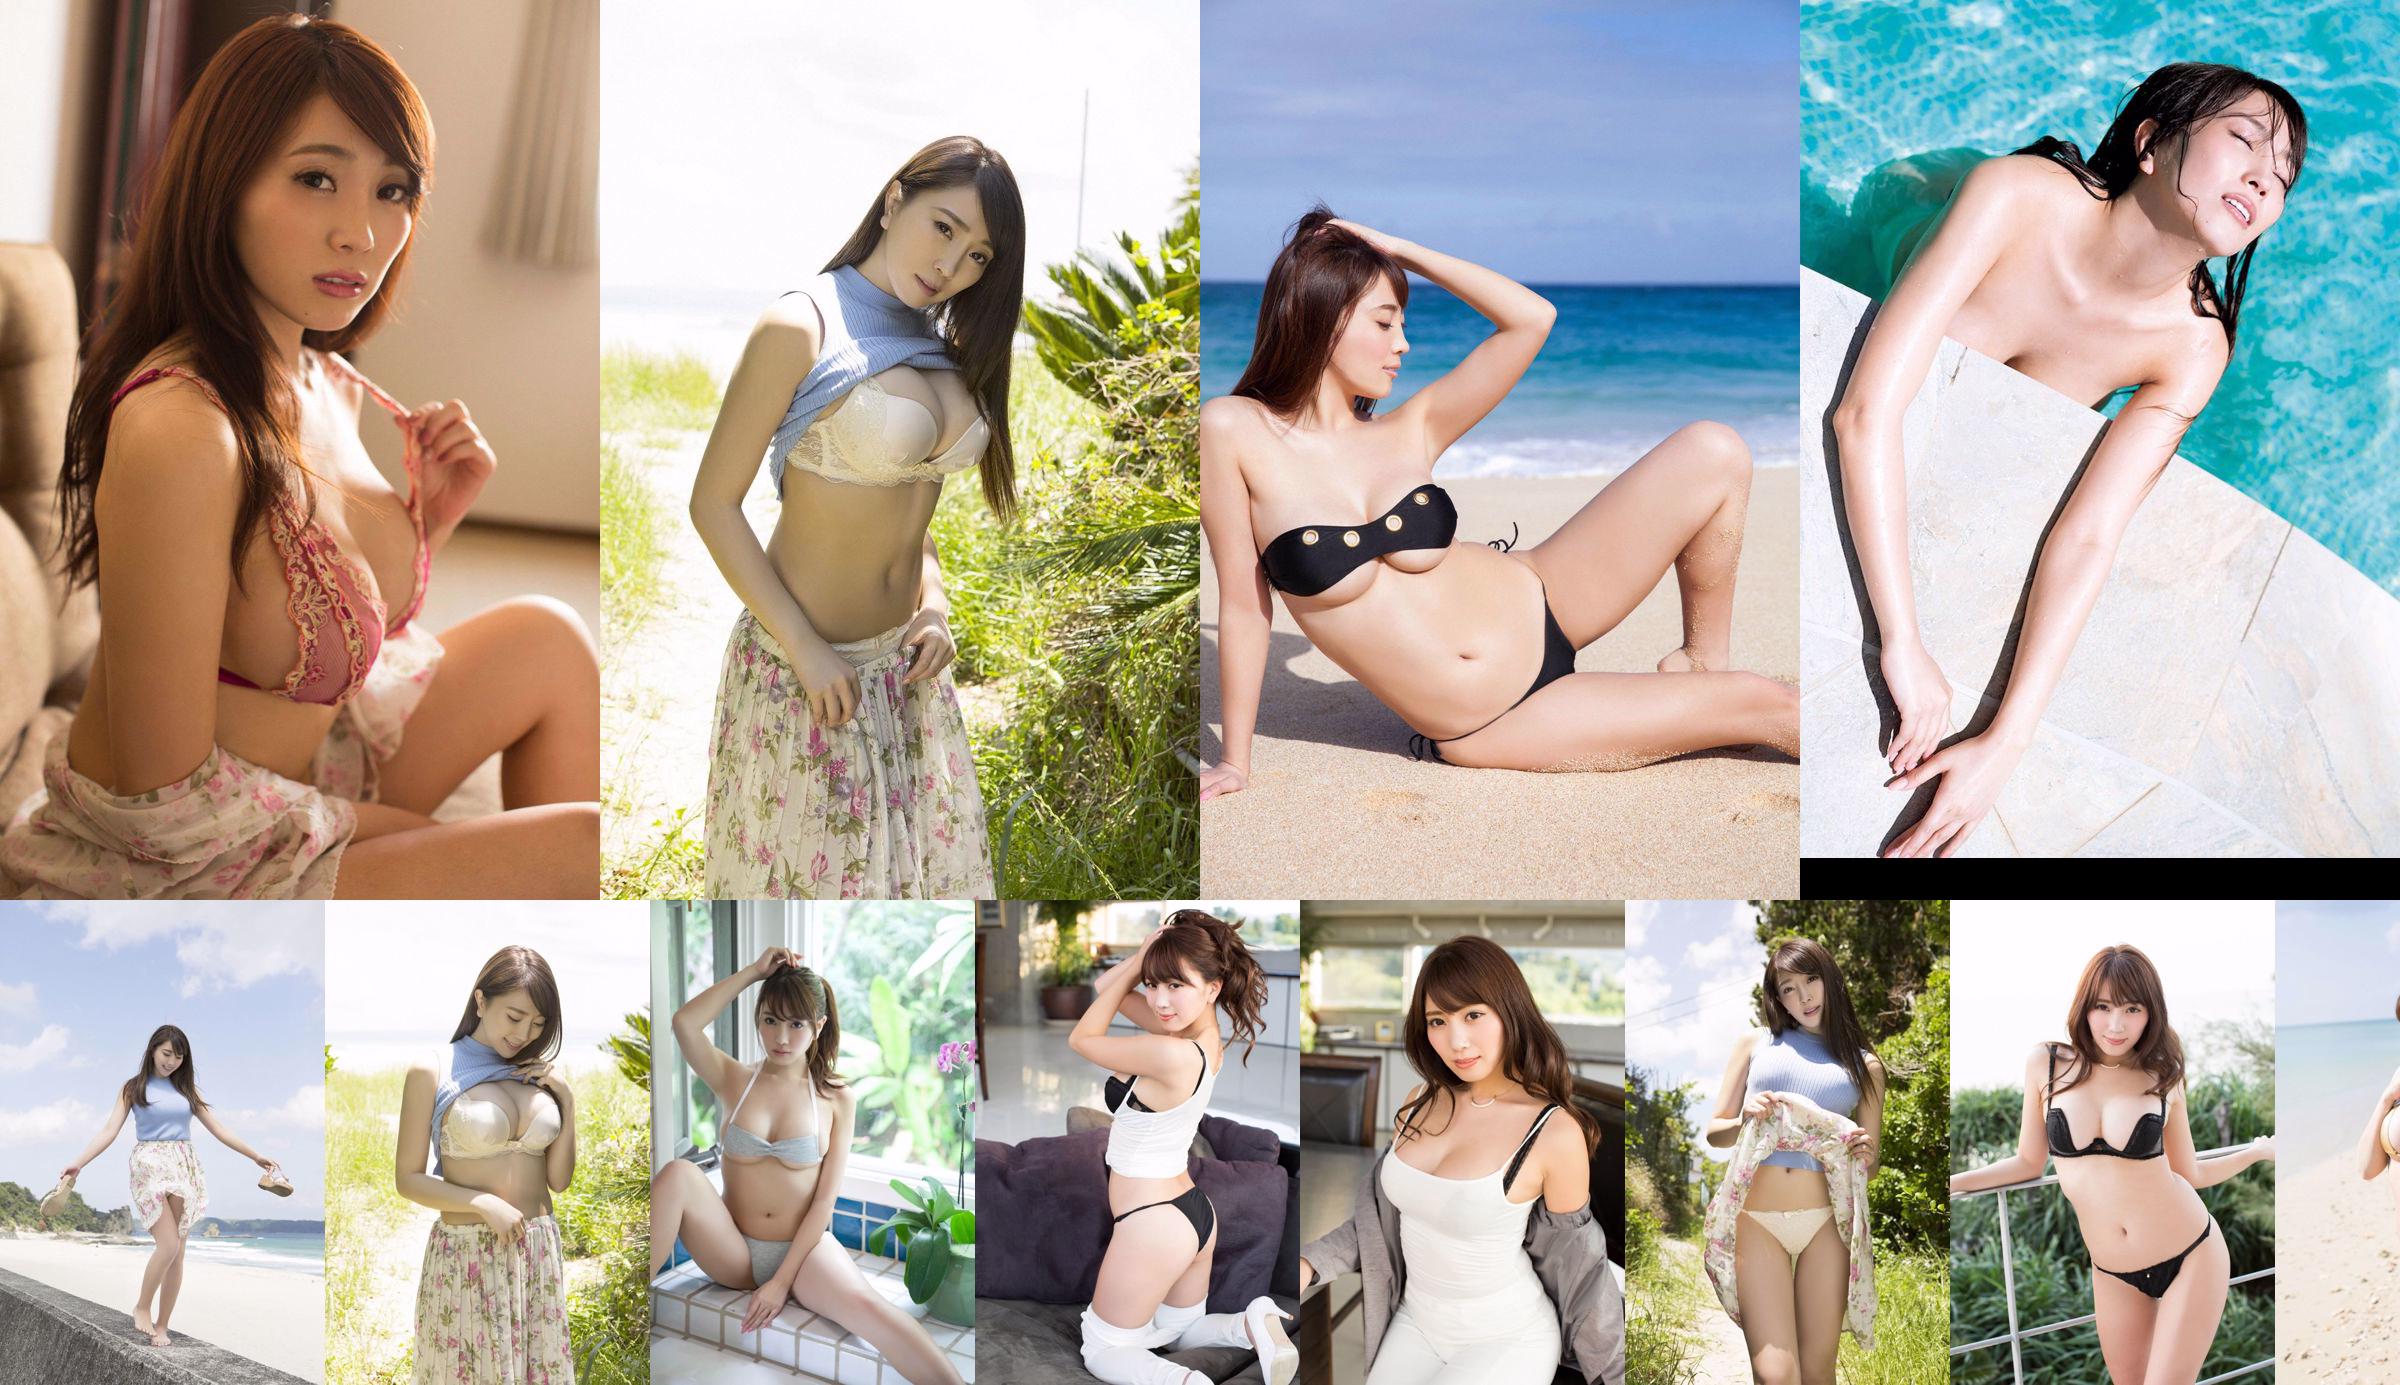 Yume Takeda Yume Takeda / Yume Takeda [Graphis] Gravure First off daughter No.09b8ac Page 2